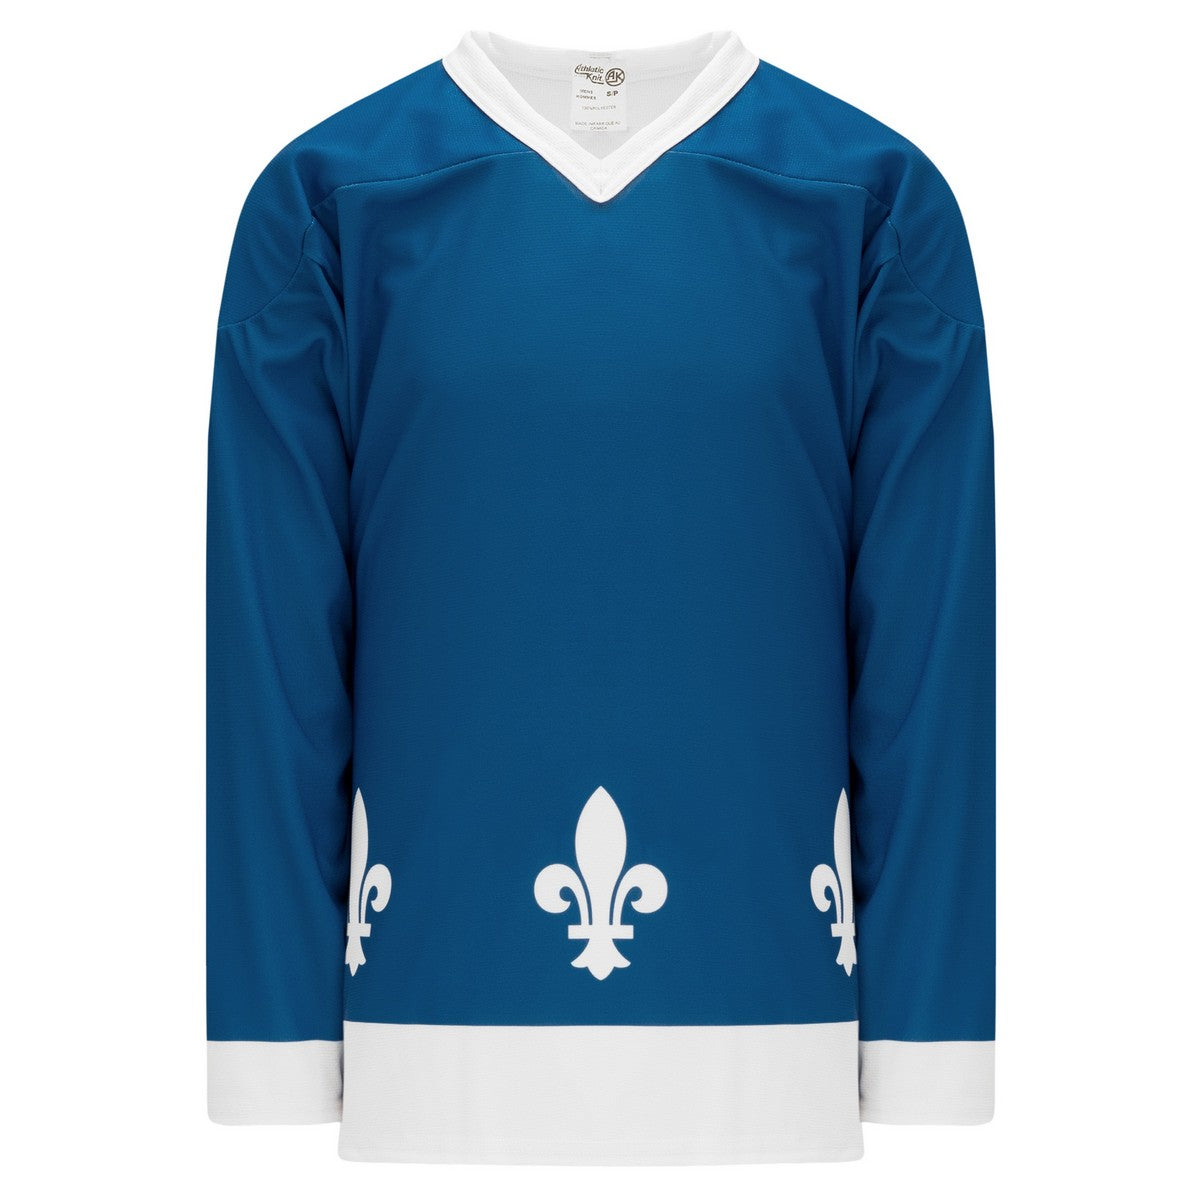 Replica Classic Style Quebec Nordiques Blue Hockey Jersey